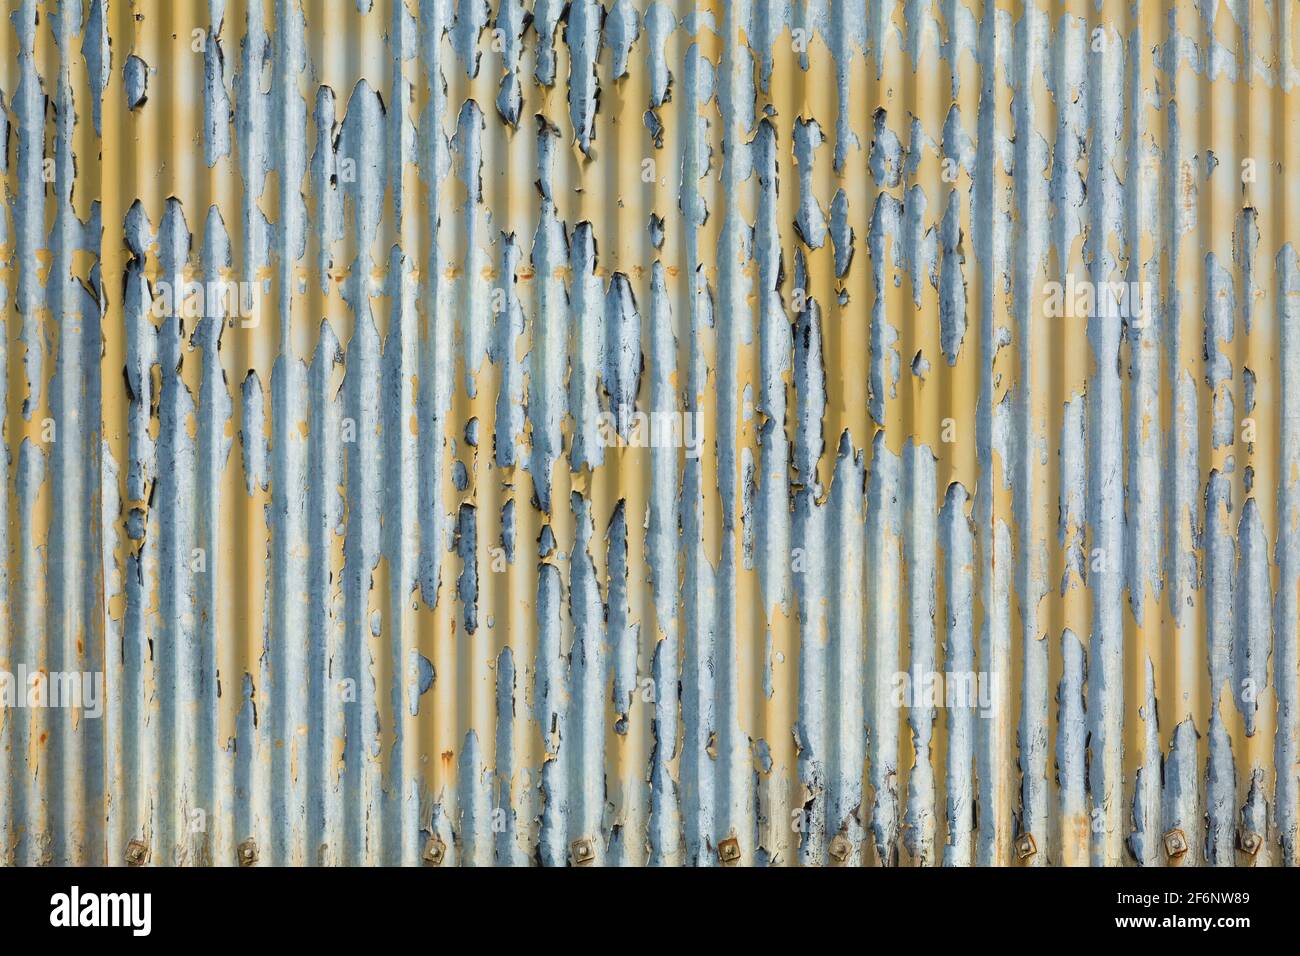 Corrugated metal roof with peeling paint, urban texture, pattern or background, UK Stock Photo